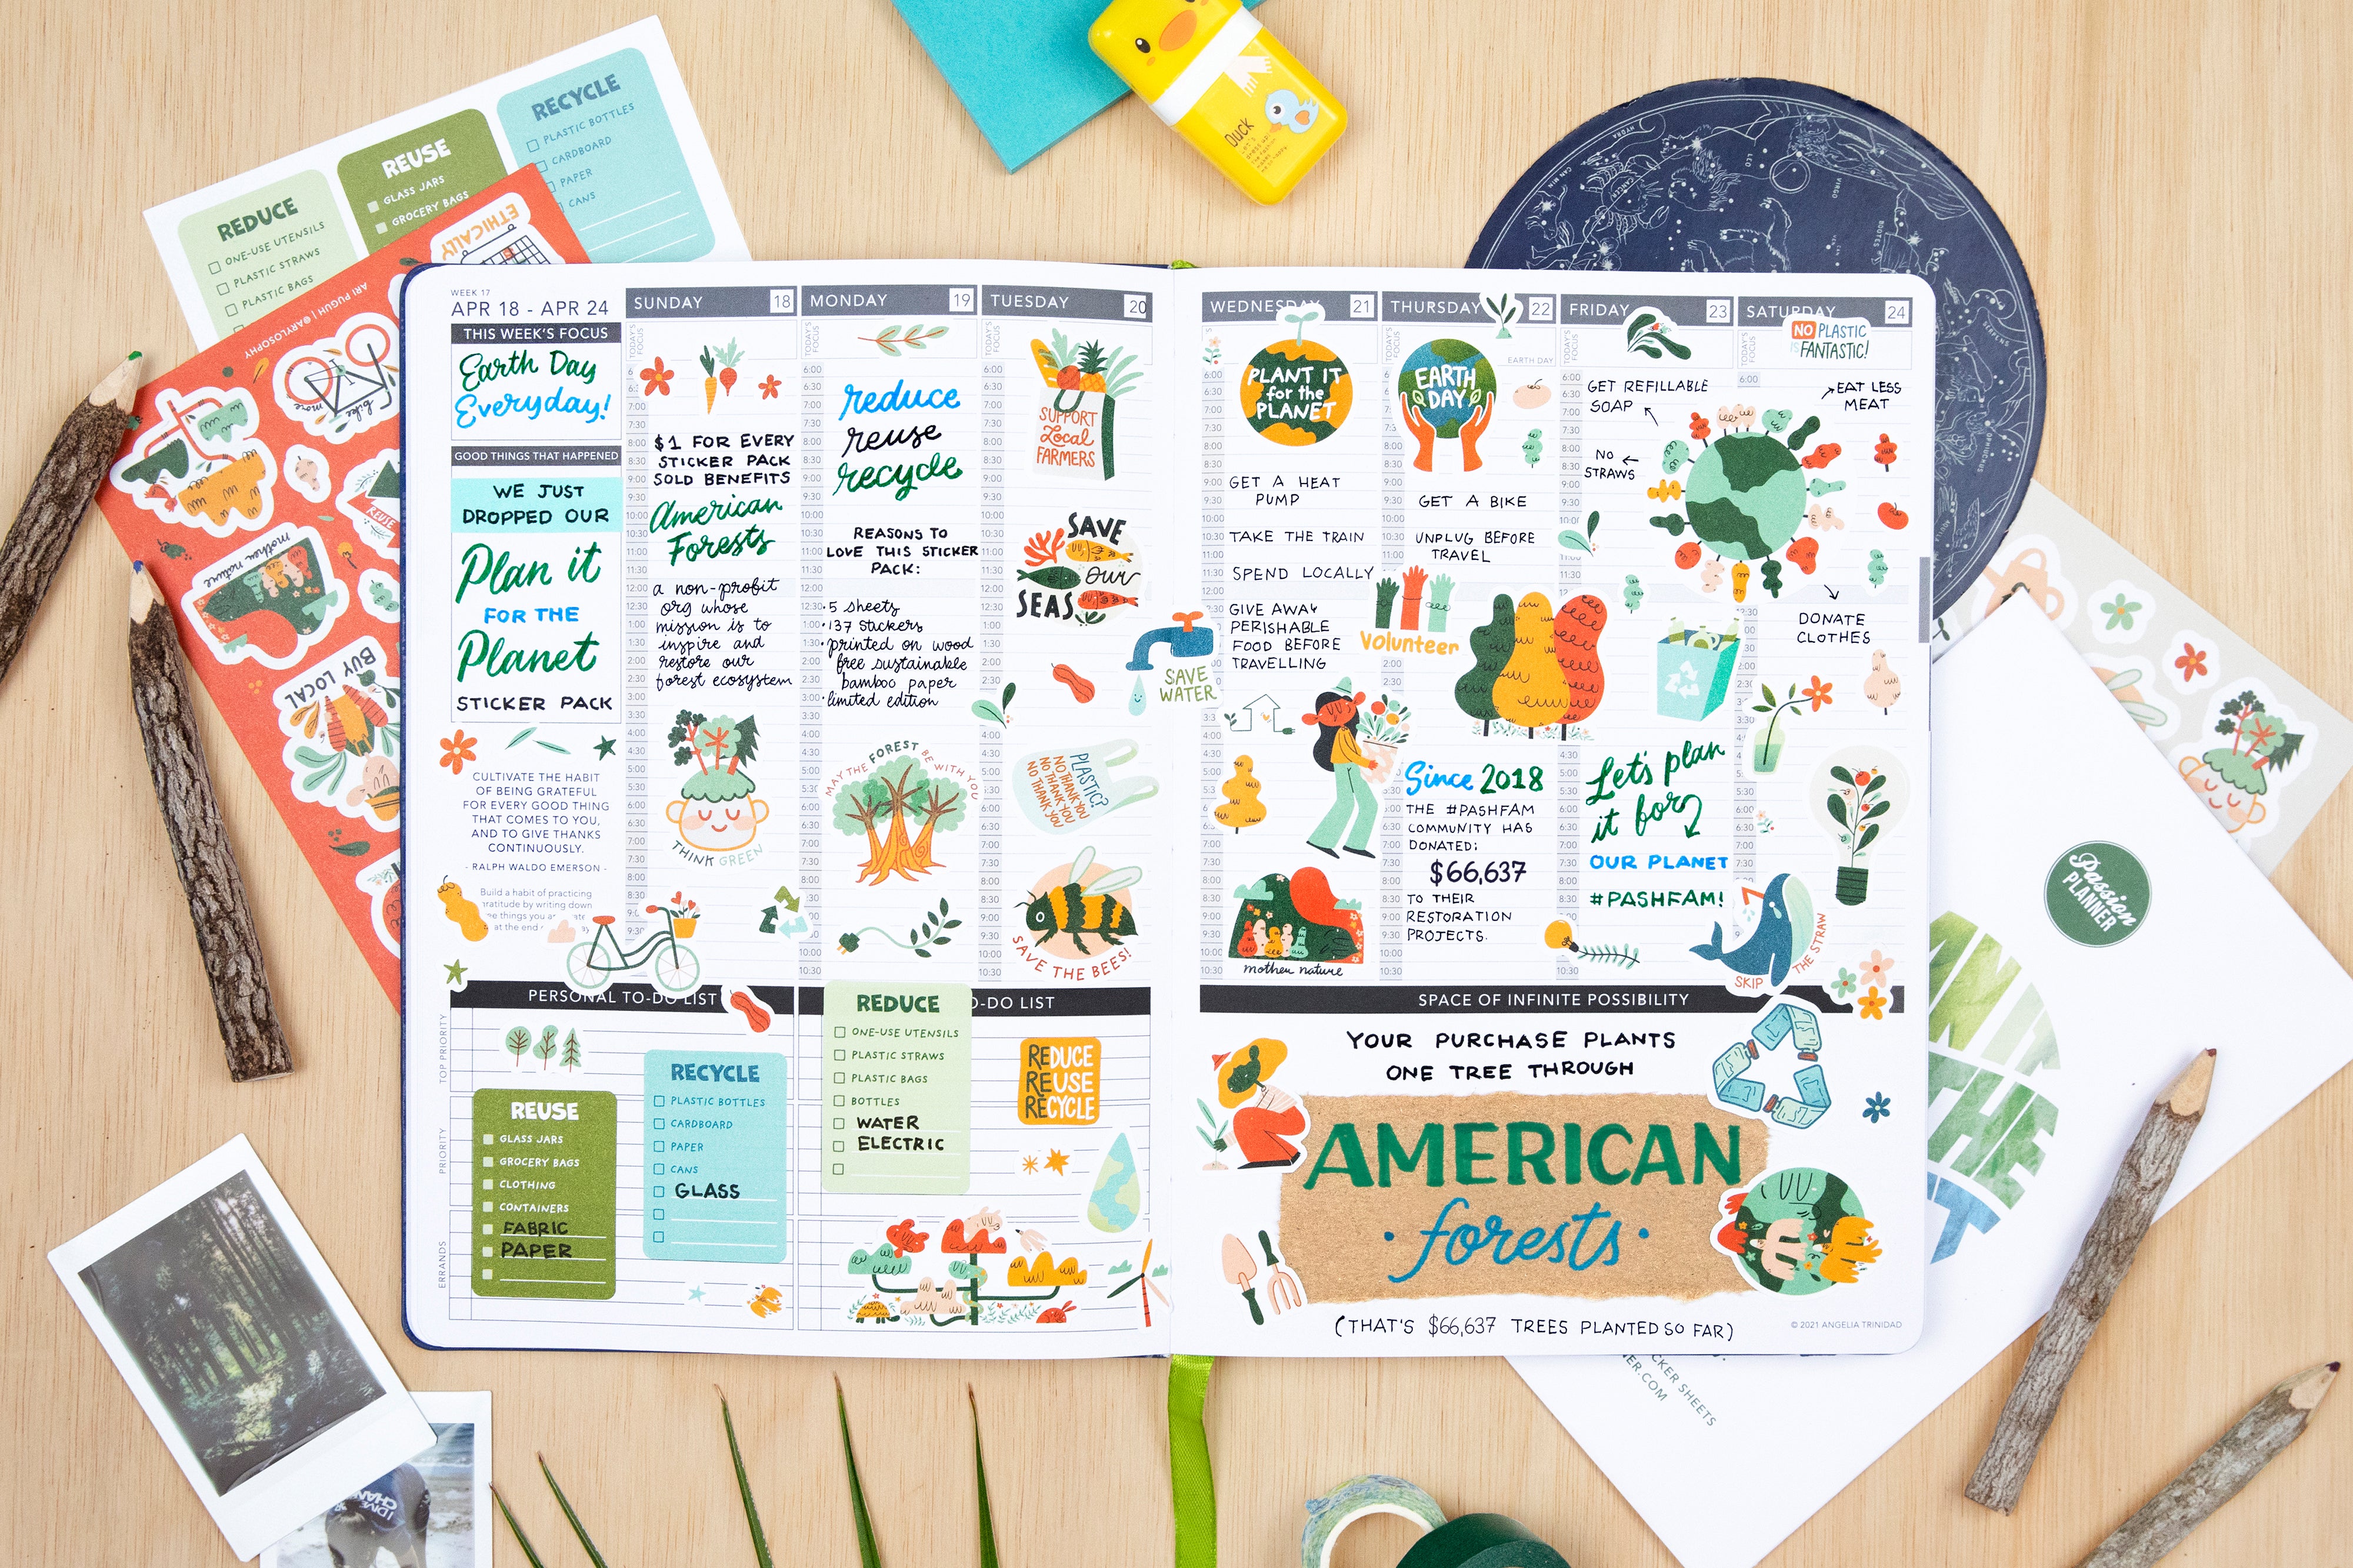 Plan It for the Planet Sticker Pack - Passion Planner